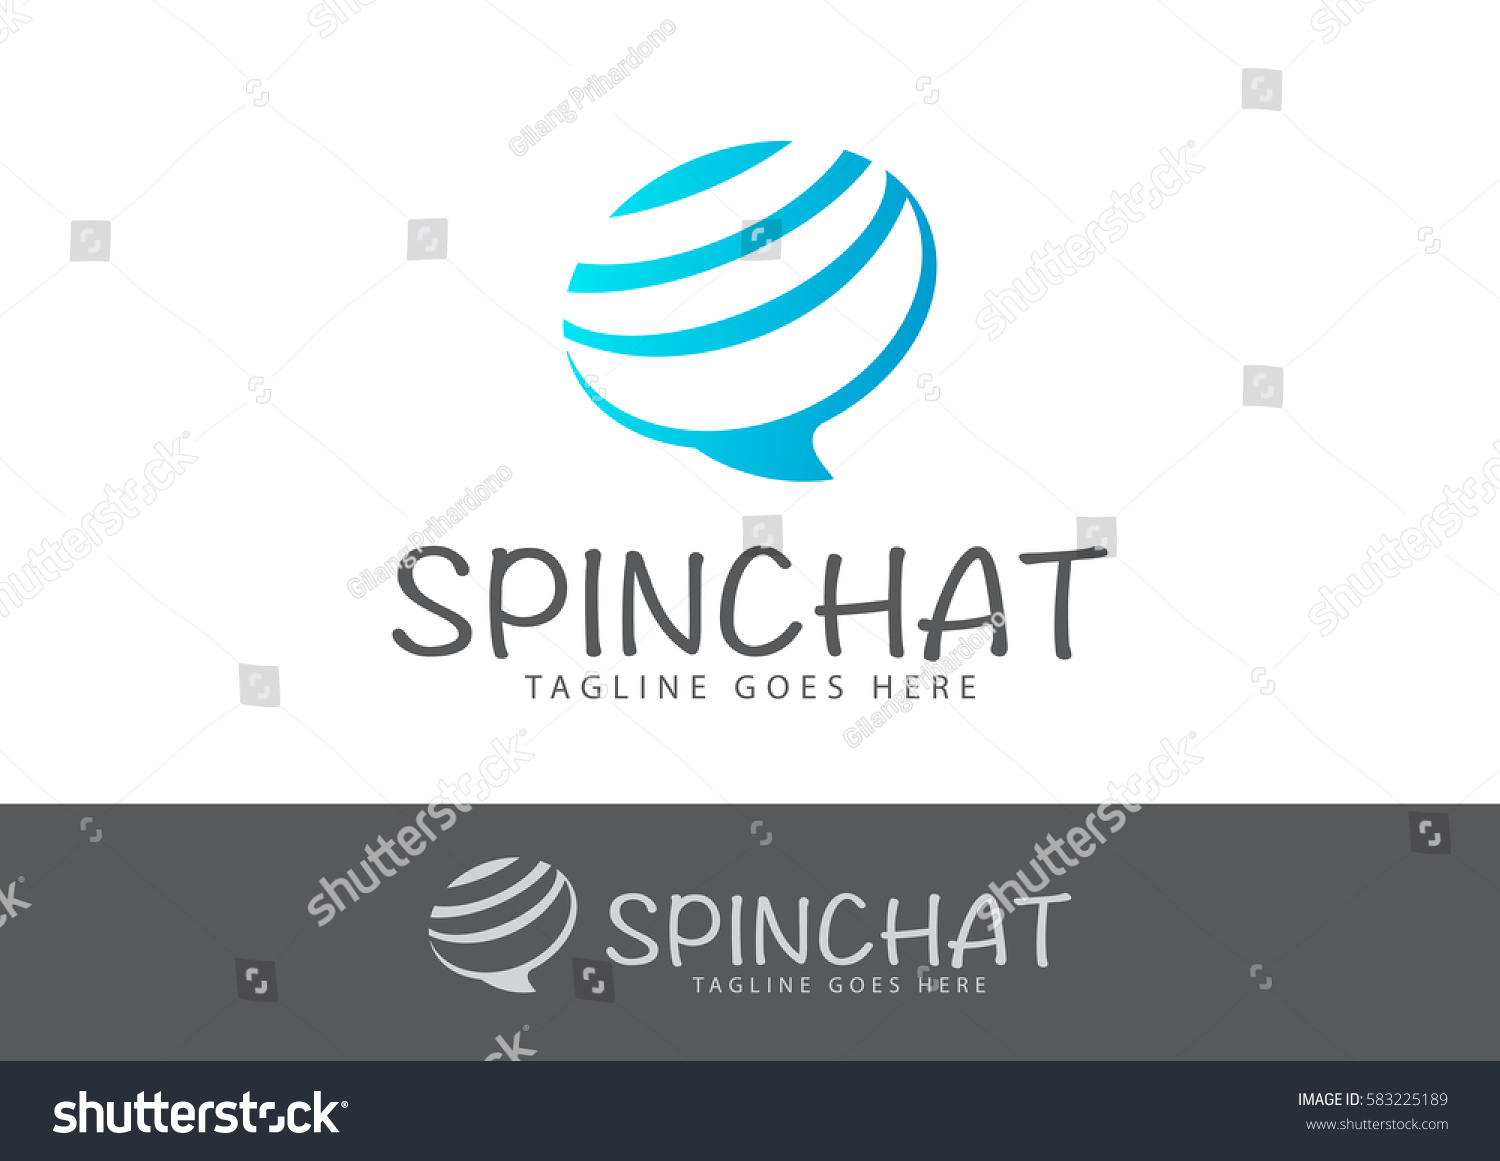 Chat spinchat